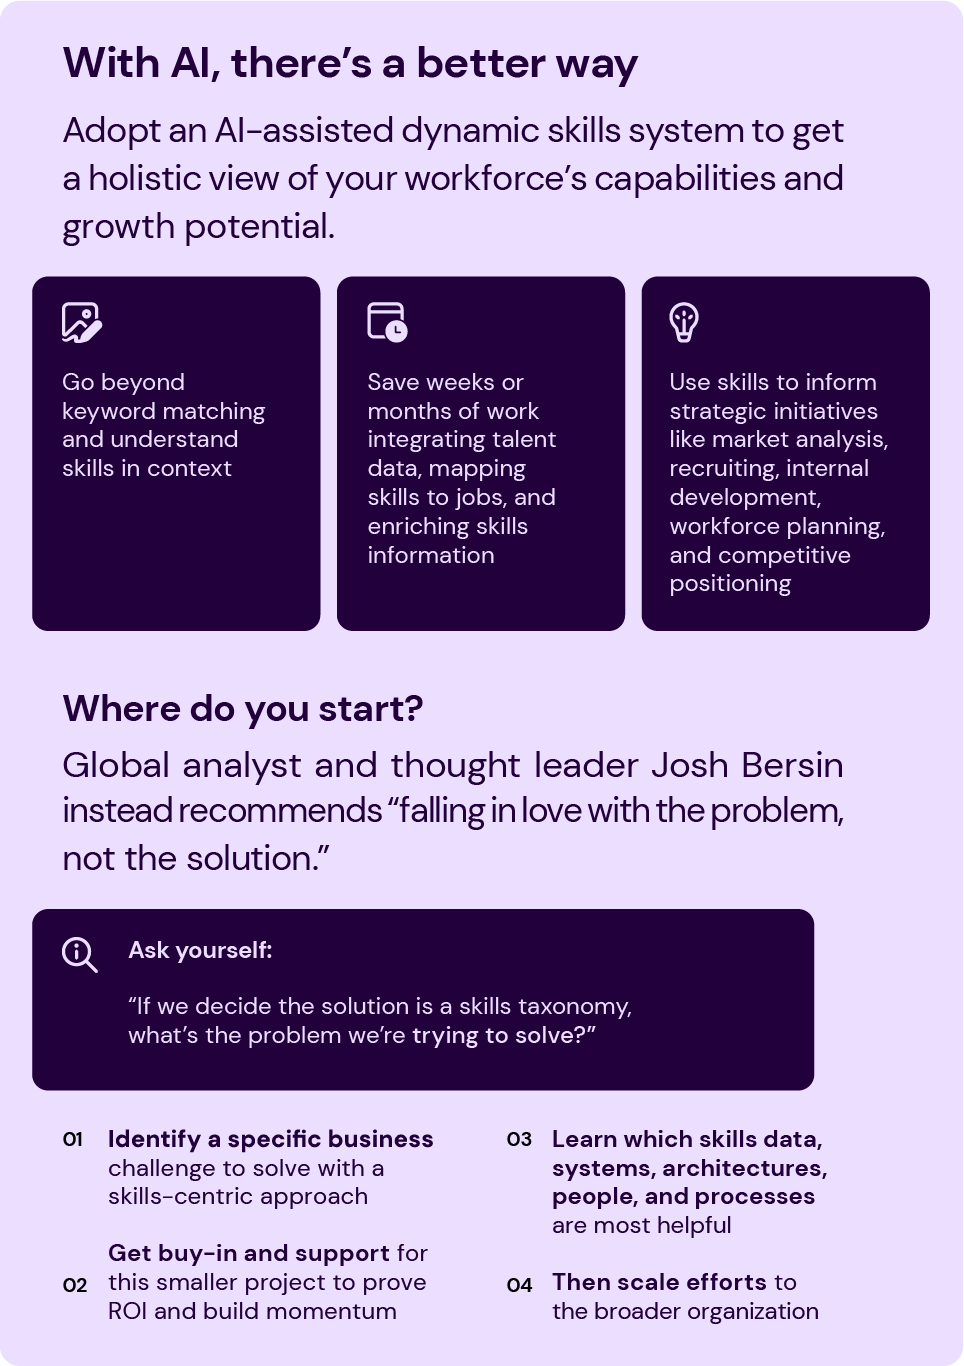 An excerpt from SeekOut's skills-based journey infographic explaining how adopting an AI-assisted skills system: gives you a holistic view of your workforce's capabilities and growth potential; goes beyond keyword matching to understand skills in context; saves weeks or months of work integrating talent data, mapping skills to jobs, and enriching skills information; informs strategic initiatives with skills such as market analysis, recruiting, internal development, workforce planning, and competitive positioning. The graphic also explains that global analyst and thought leader Josh Bersin recommends "falling in love with the problem" which means to identify a specific business challenge to solve with a skills-centric approach, get buy-in and support to prove ROI and build momentum, learn which skills data, systems, architectures, people and processes are most helpful, and then scale efforts to the broader organization.